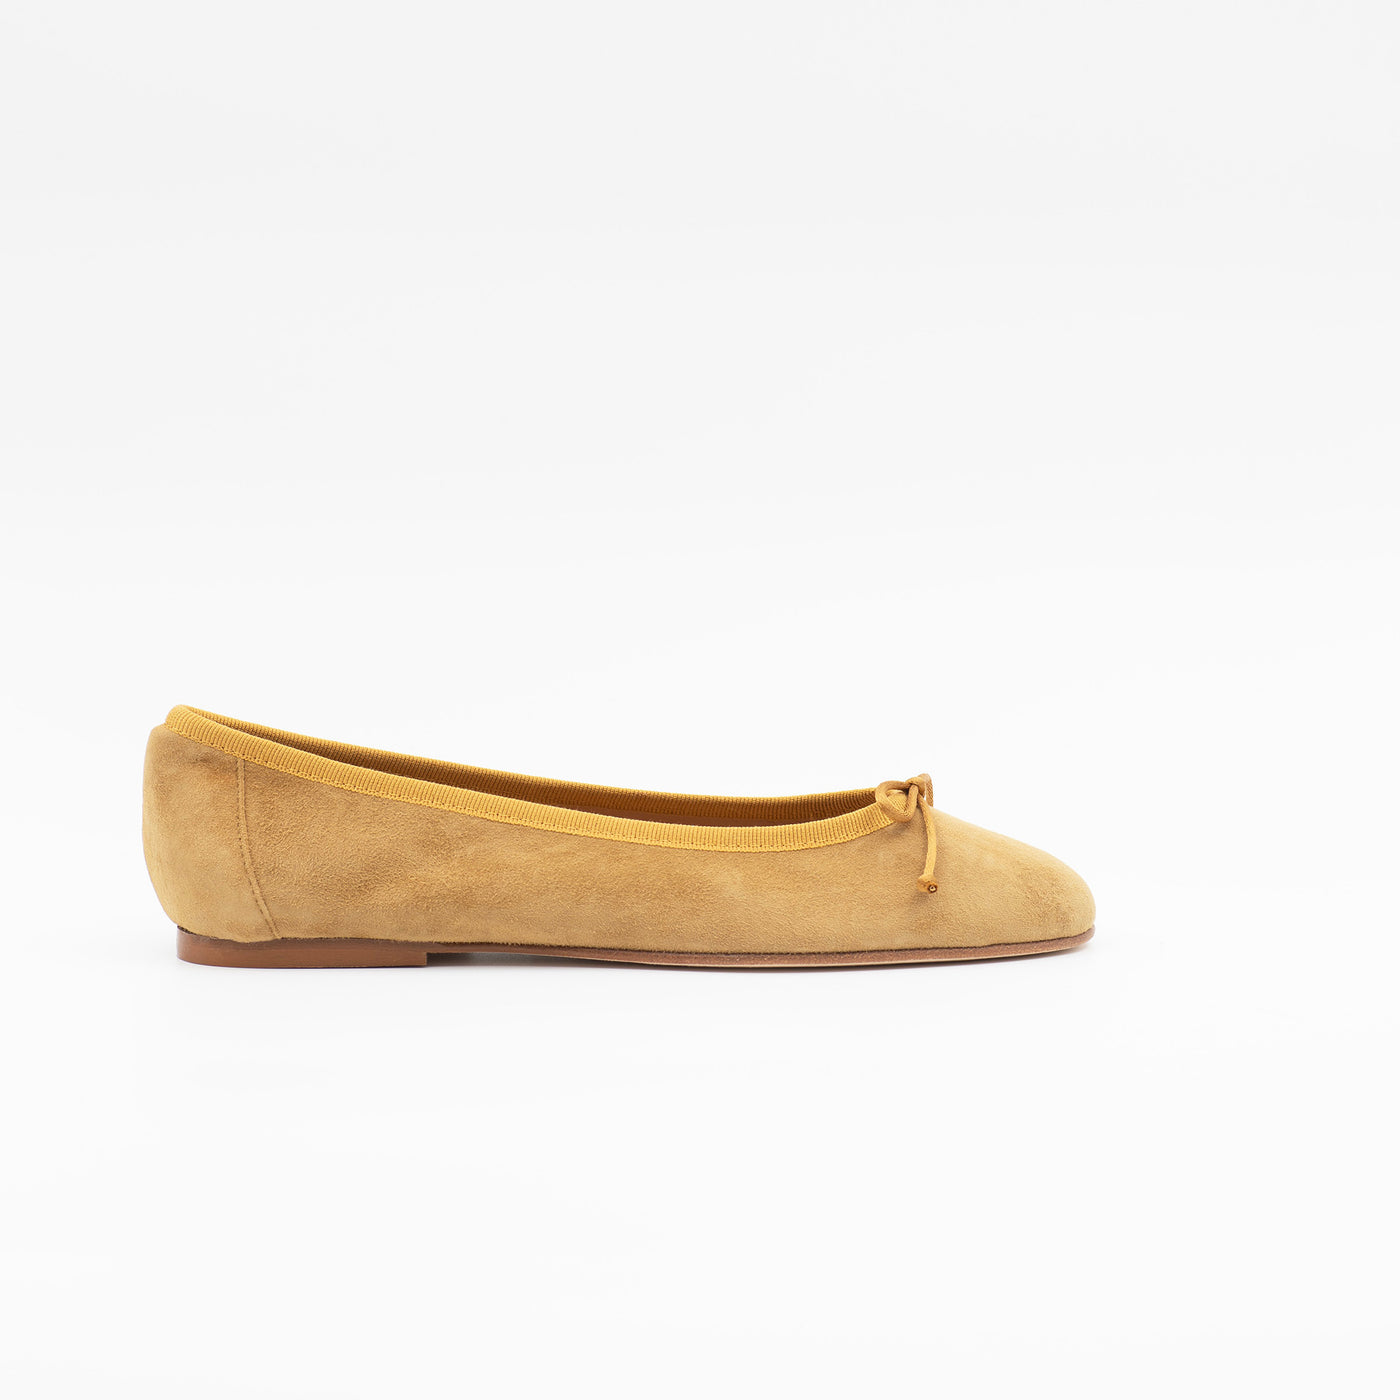 Scala in Mustard Suede